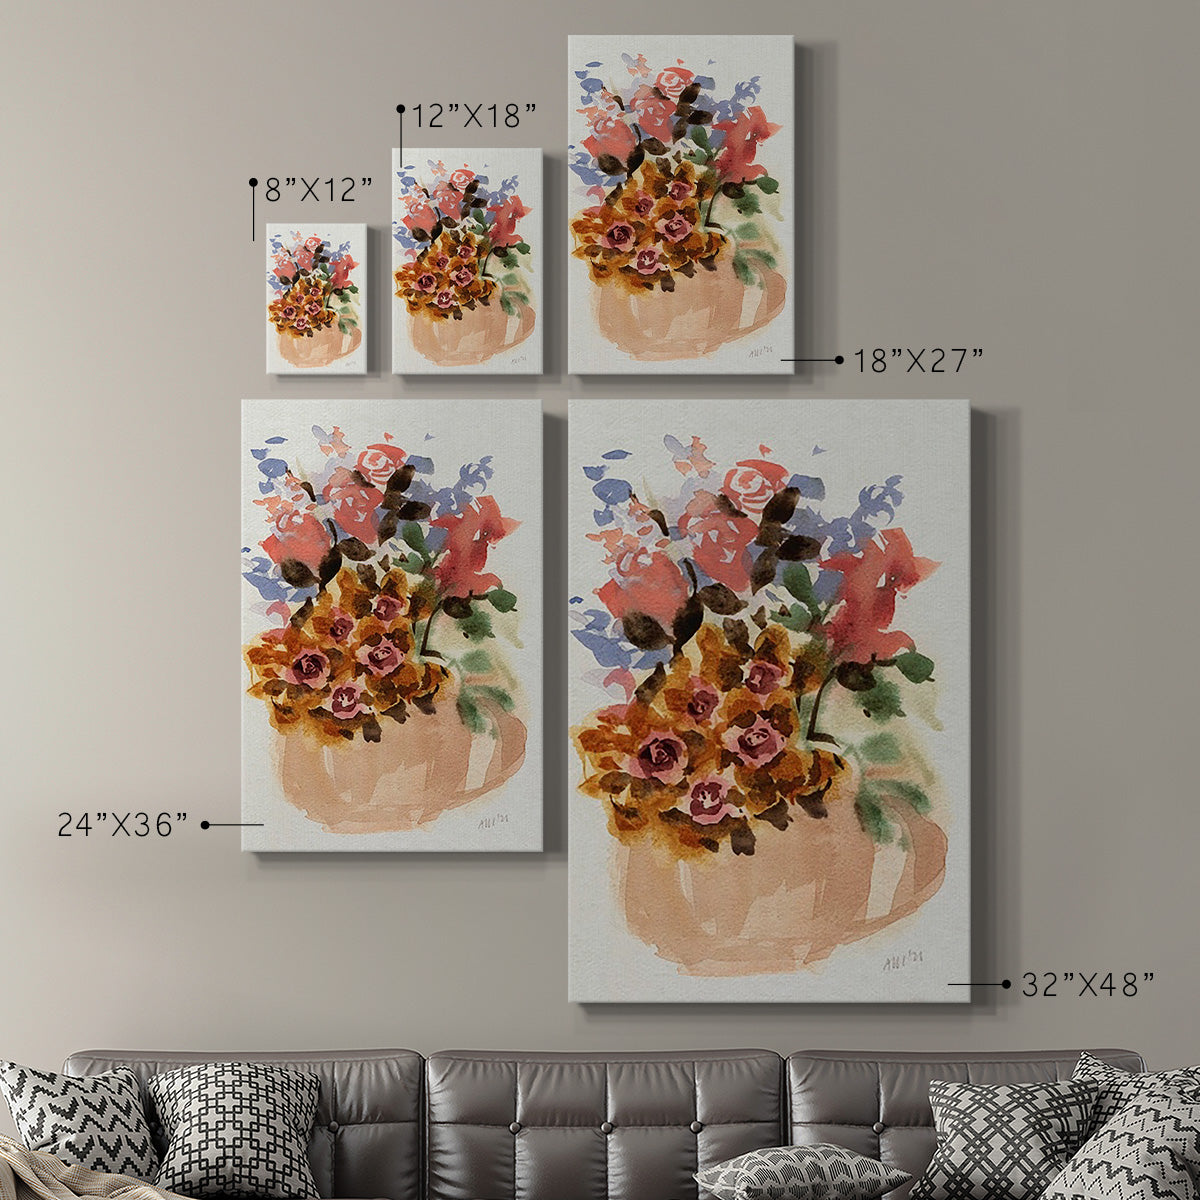 Mauve Bouquet in Teapot II Premium Gallery Wrapped Canvas - Ready to Hang